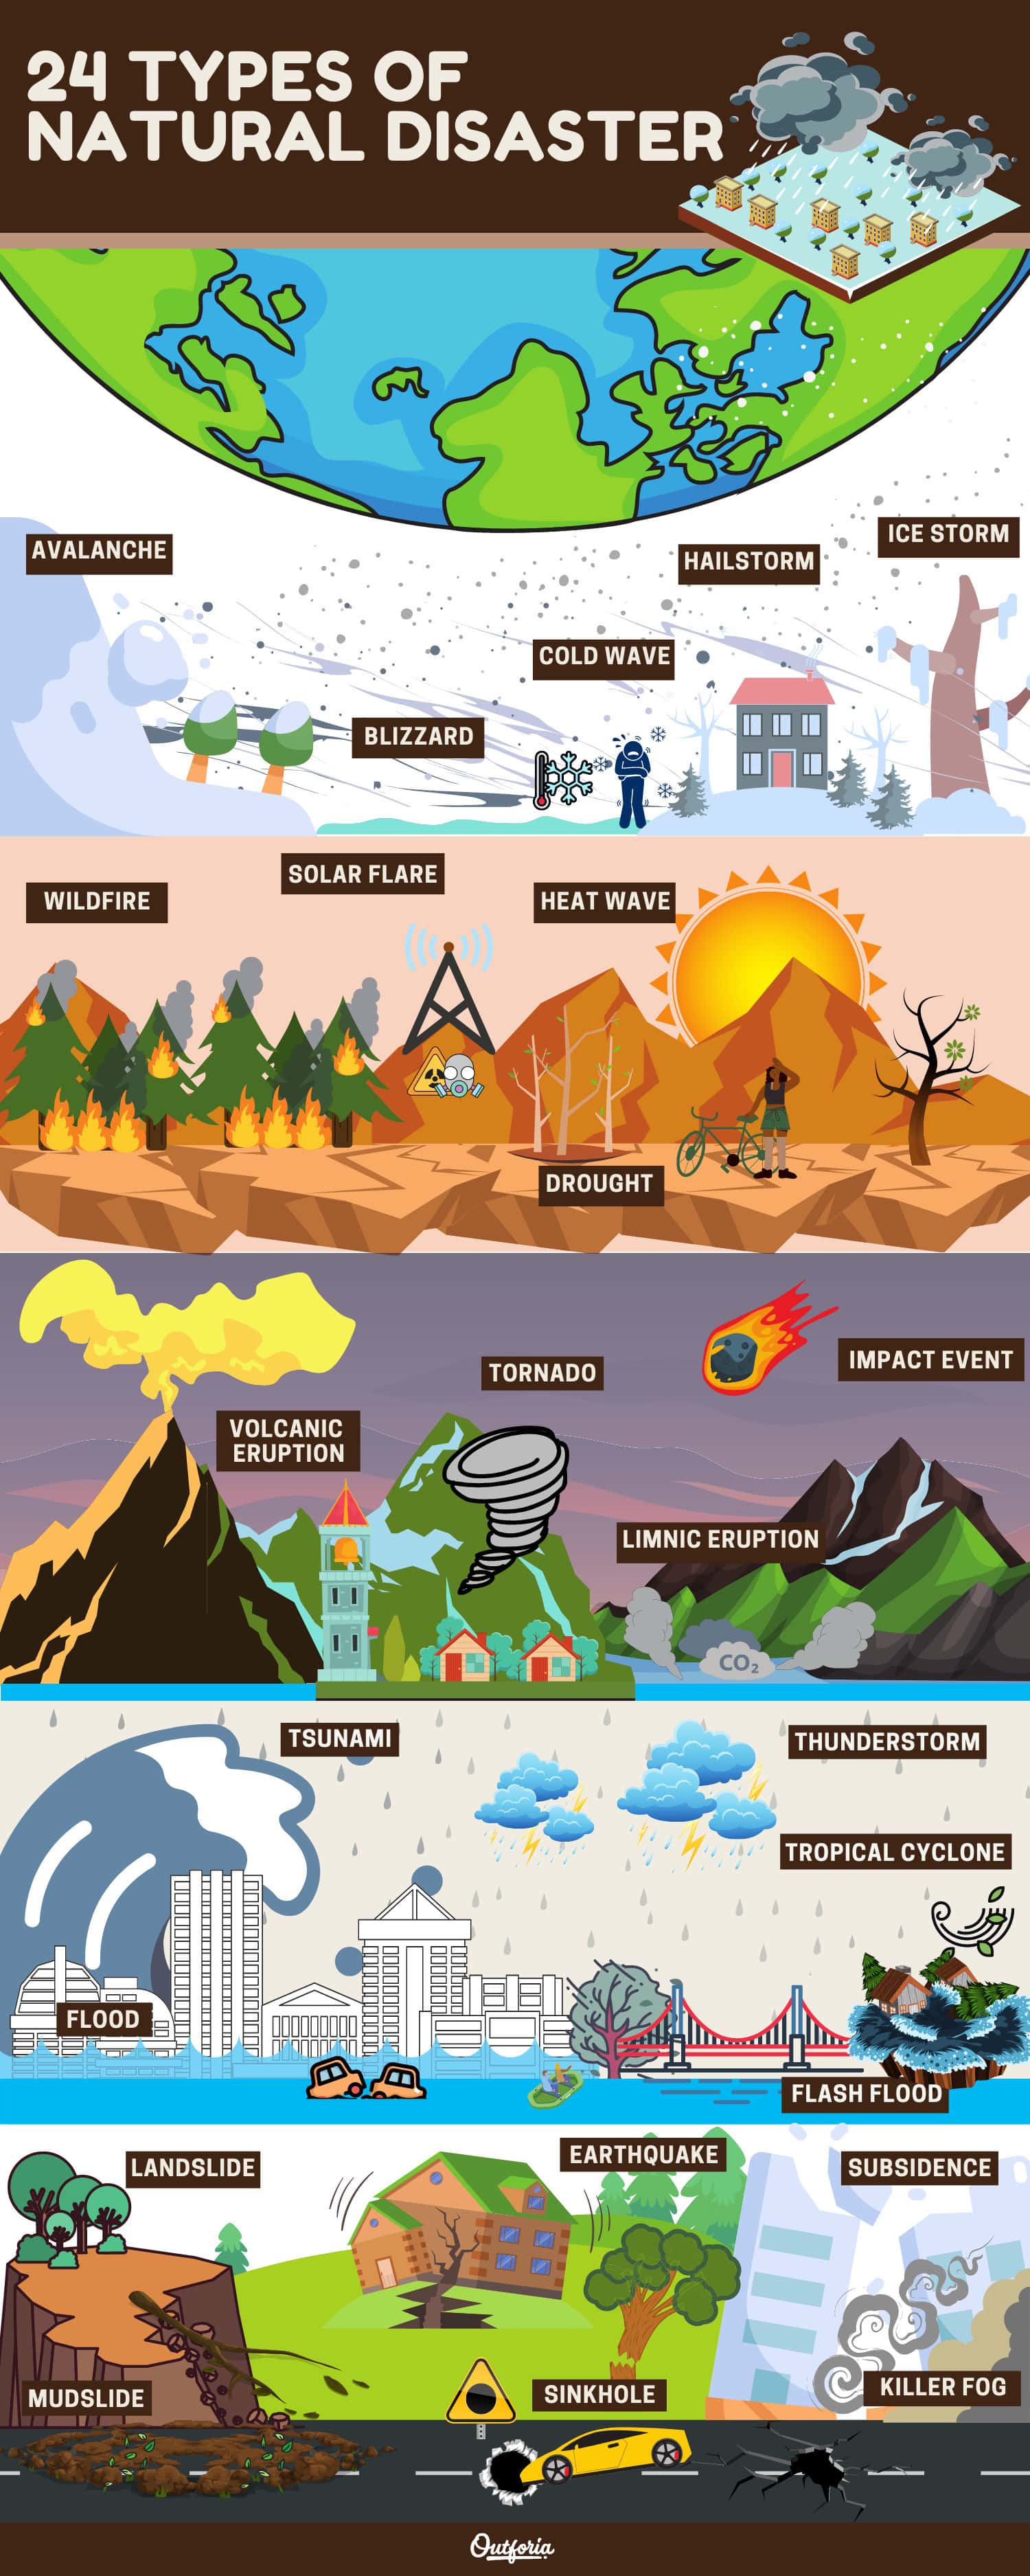 Infographic about types of natural disasters